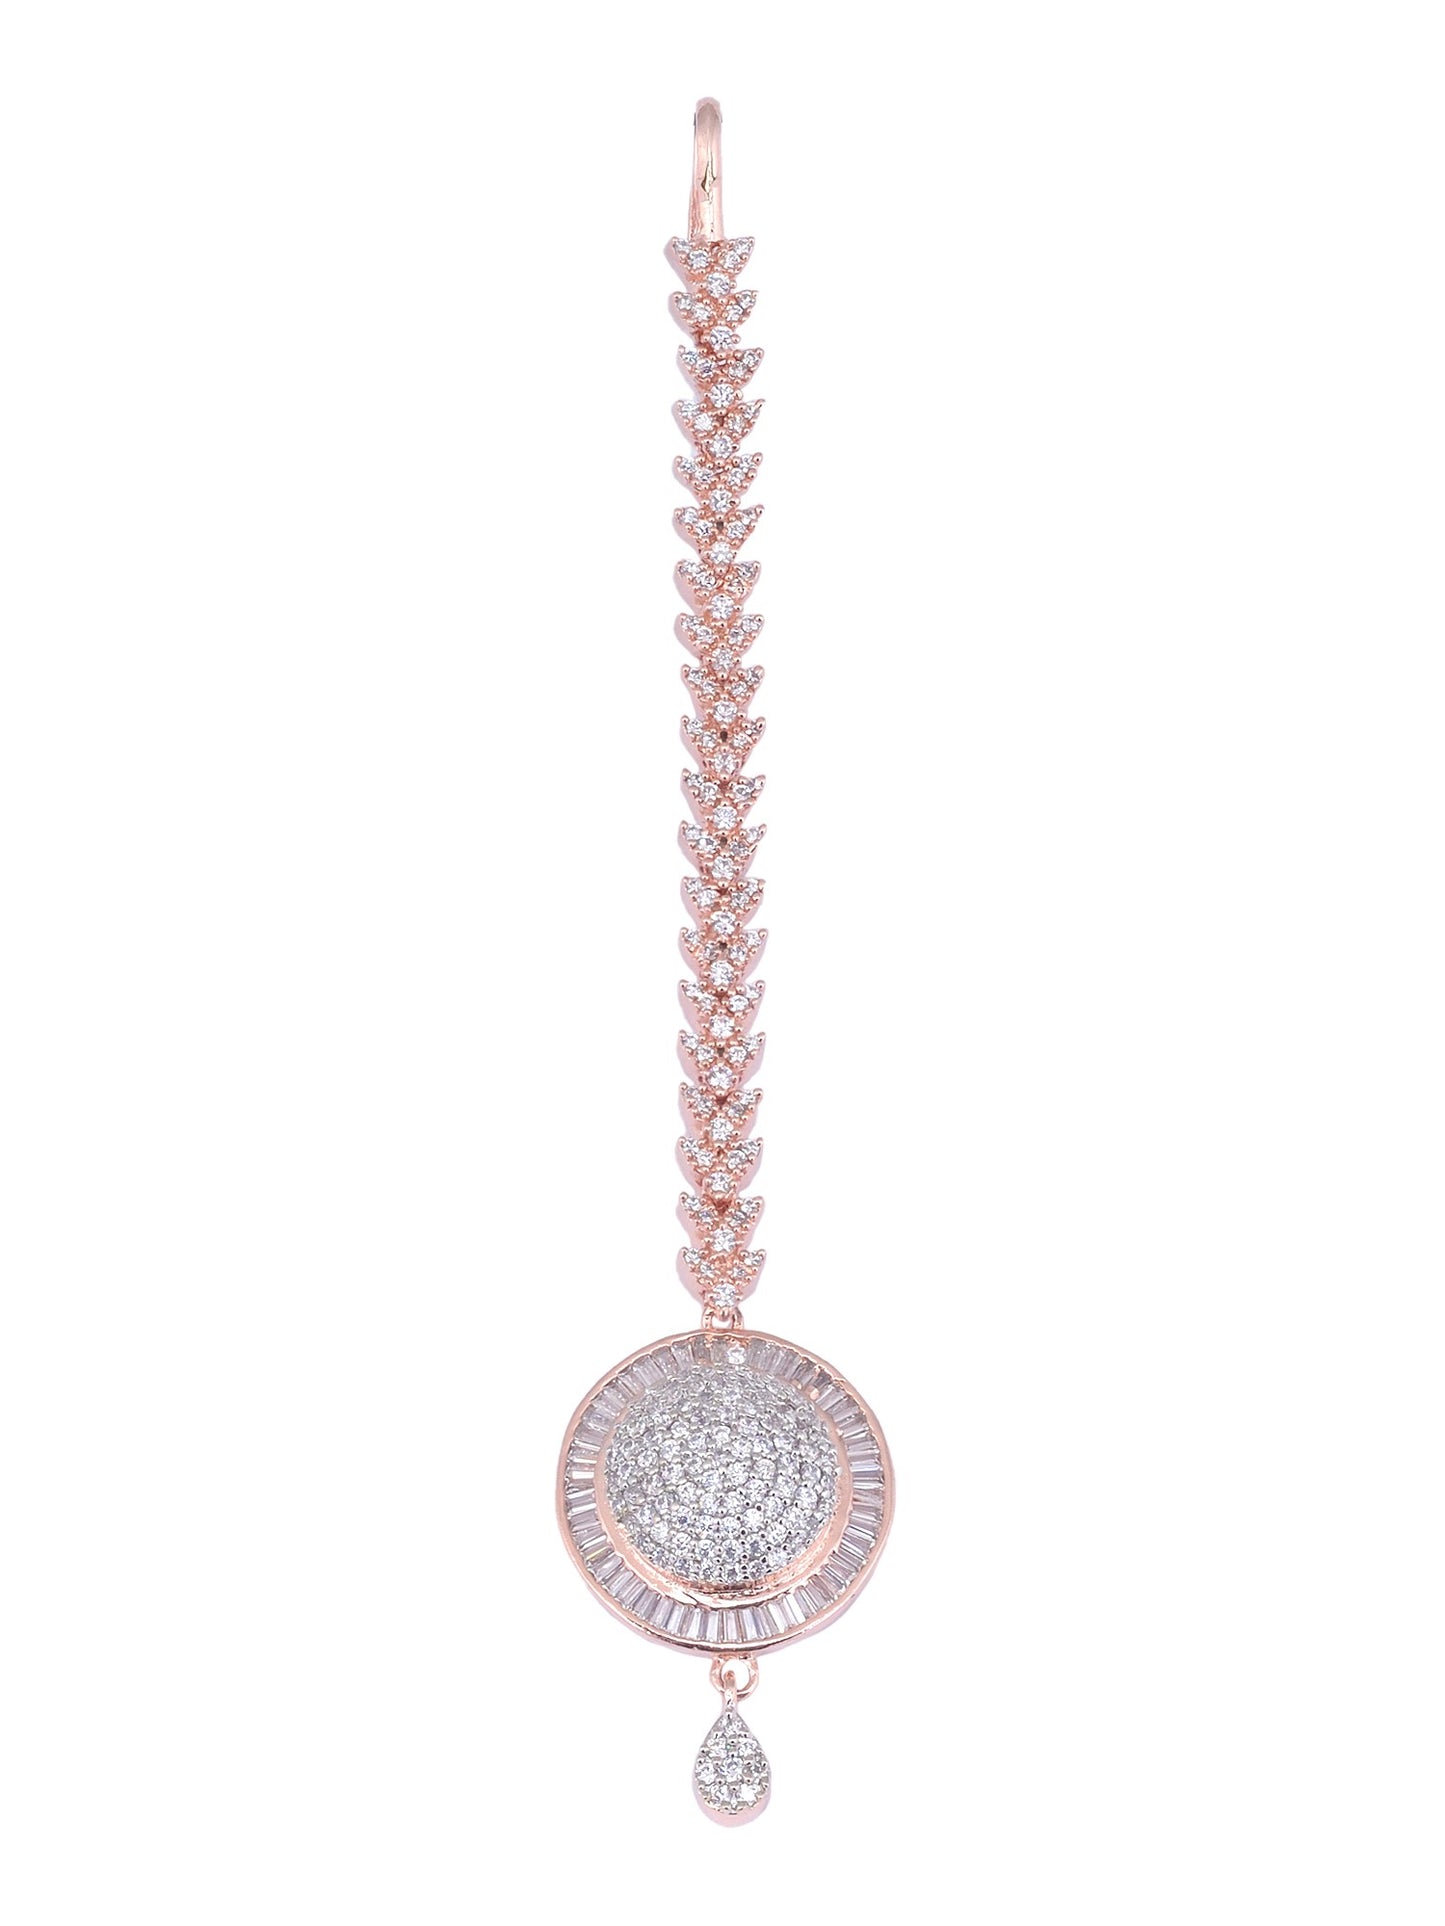 Unique Diamond clustered Maang Tikka round shaped Rose Gold plated AD studded for Women & Girls